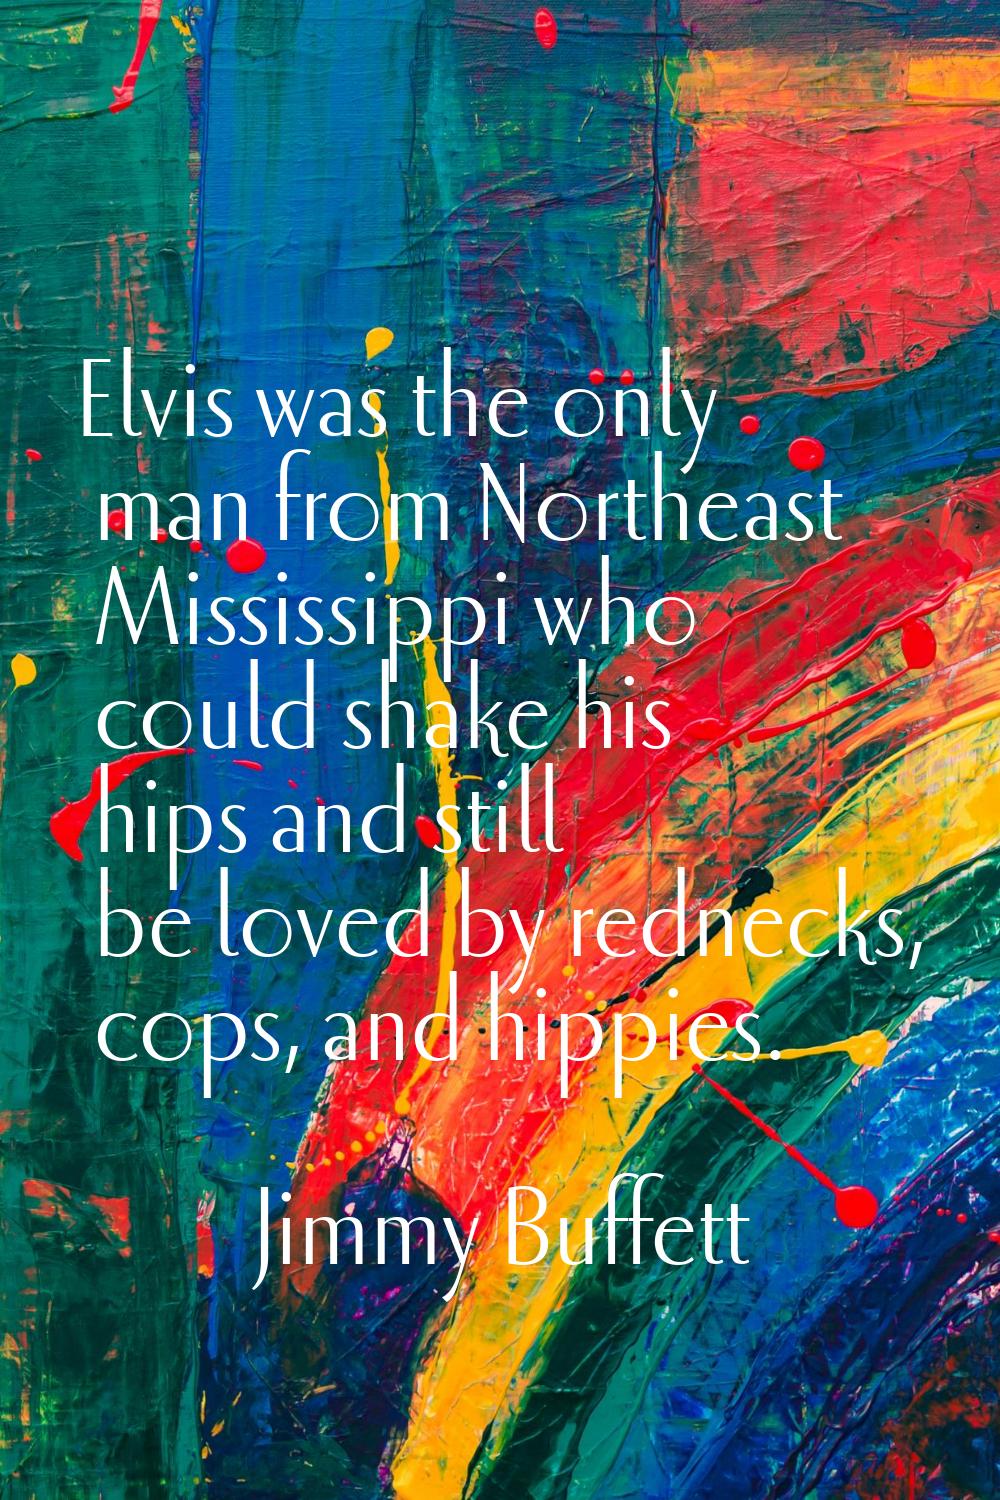 Elvis was the only man from Northeast Mississippi who could shake his hips and still be loved by re